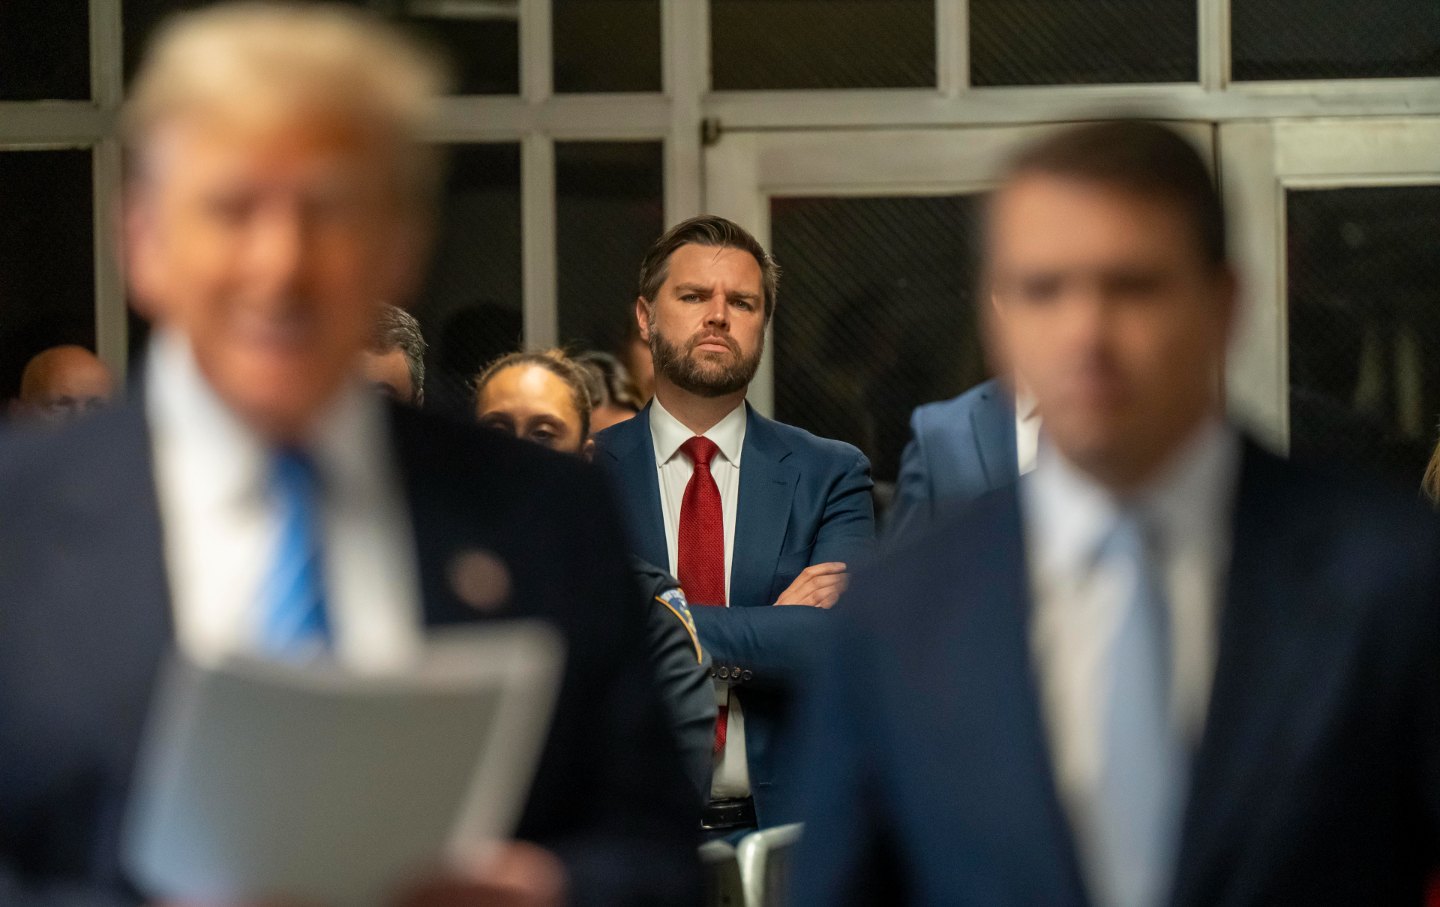 JD Vance in the background in focus with Donald Trump in the foreground out of focus.